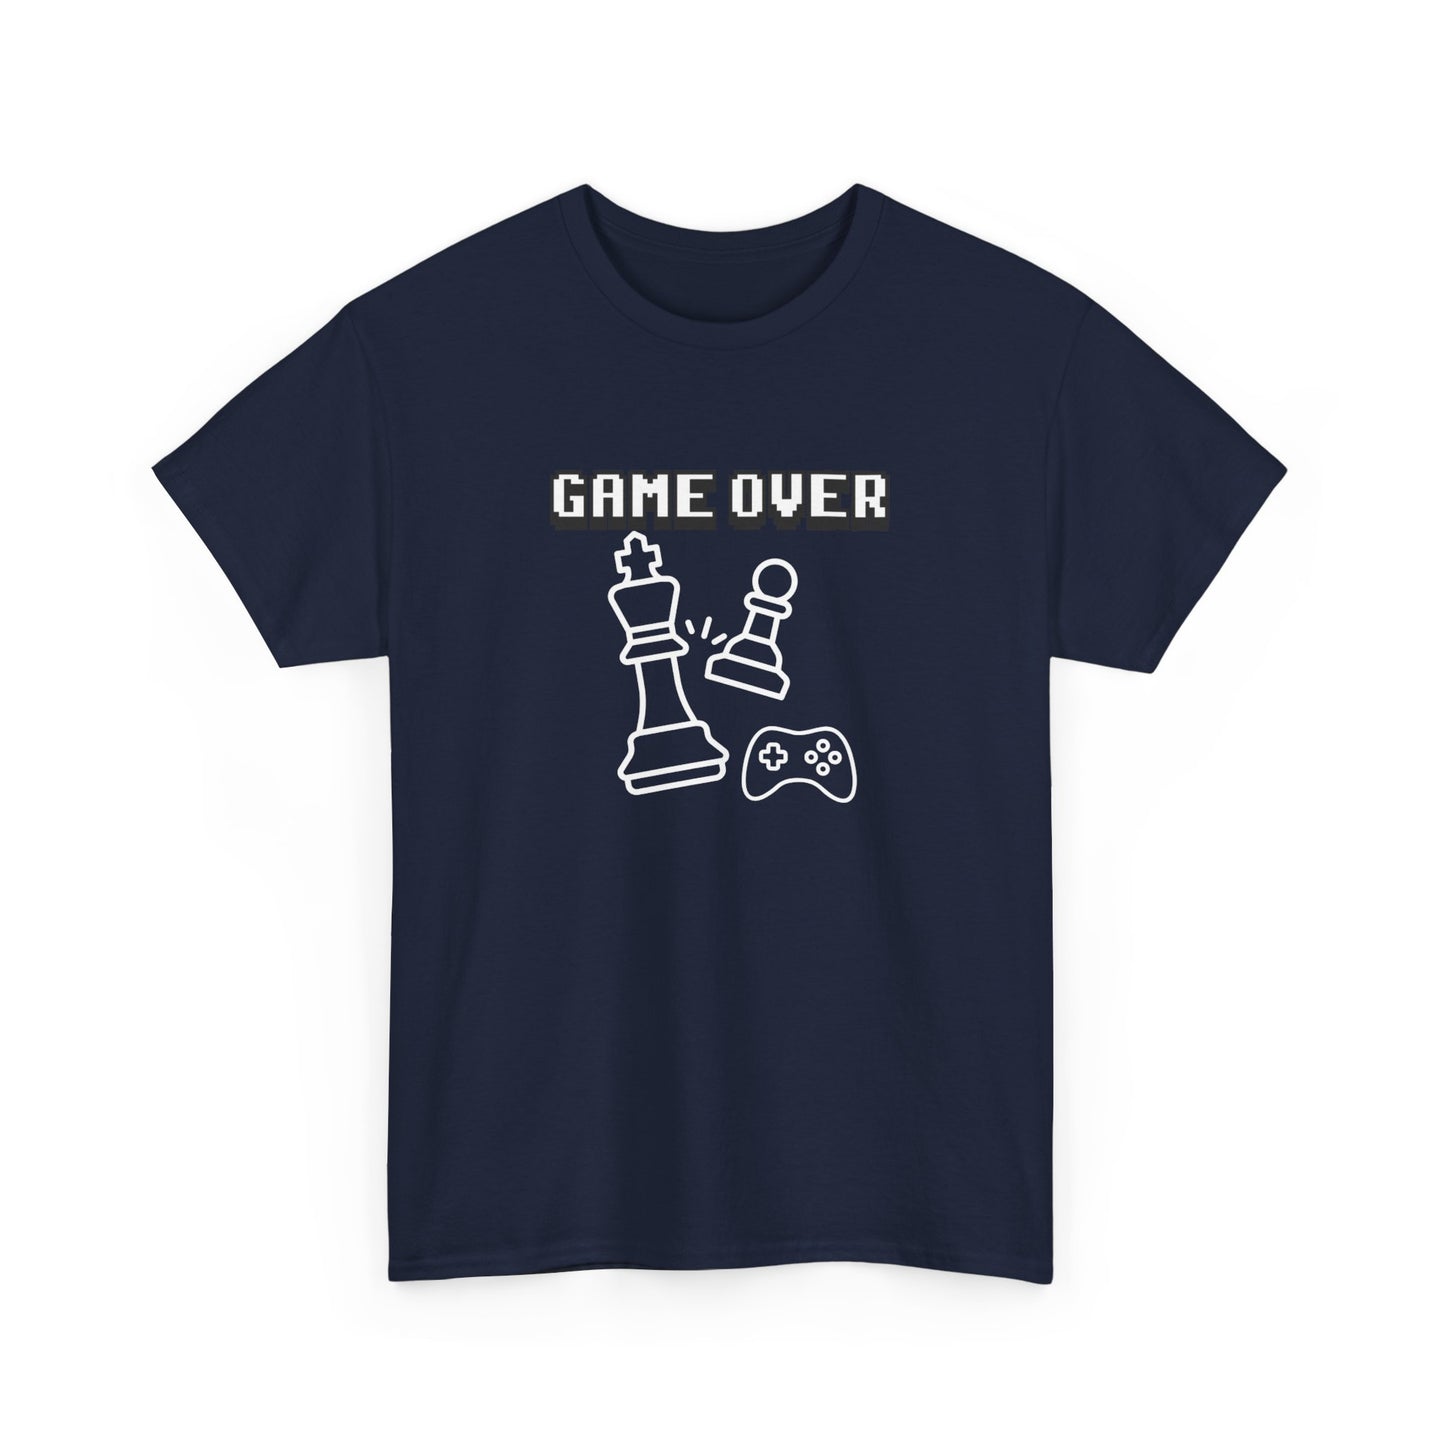 Game Over T-Shirt,  Gamer T-Shirt, Gaming Tee 100% Cotton, 4 Colours, AUS - USA warehouse, free post.